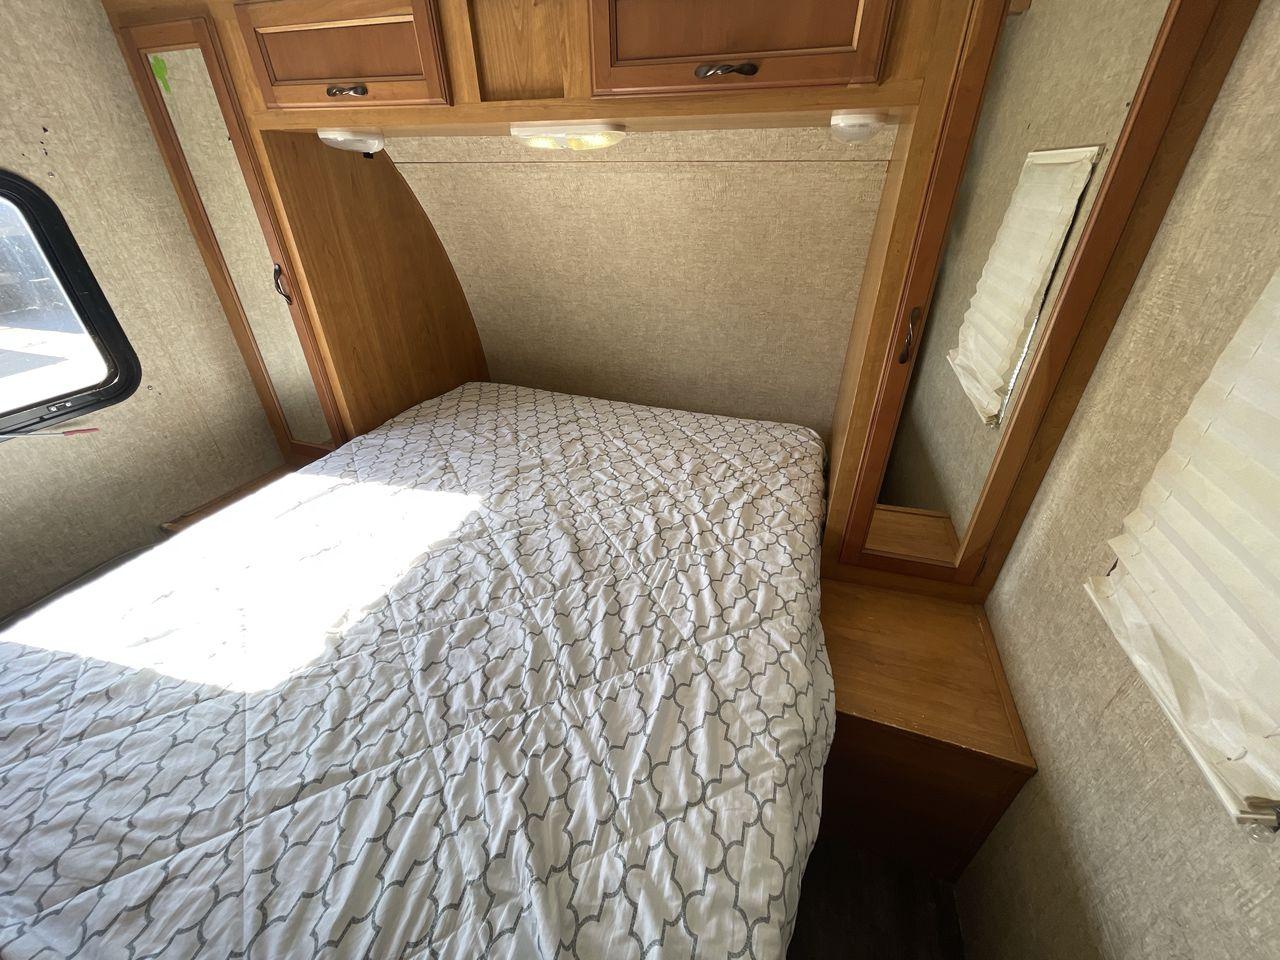 2014 BEIGE KZRV SPREE 282BHS (4EZTL2826E8) , Length: 31.33 ft. | Dry Weight: 5,610 lbs. | Gross Weight: 6,800 lbs. | Slides: 1 transmission, located at 4319 N Main Street, Cleburne, TX, 76033, (817) 221-0660, 32.435829, -97.384178 - Take the 2014 KZ RV Spree 282BHS Travel Trailer on your next vacation. Comfort, style, and functionality are all combined in this well-designed travel trailer, which makes it a great option for families or groups looking for a dependable and roomy mobile home. This trailer measures 31.33 ft in le - Photo #17